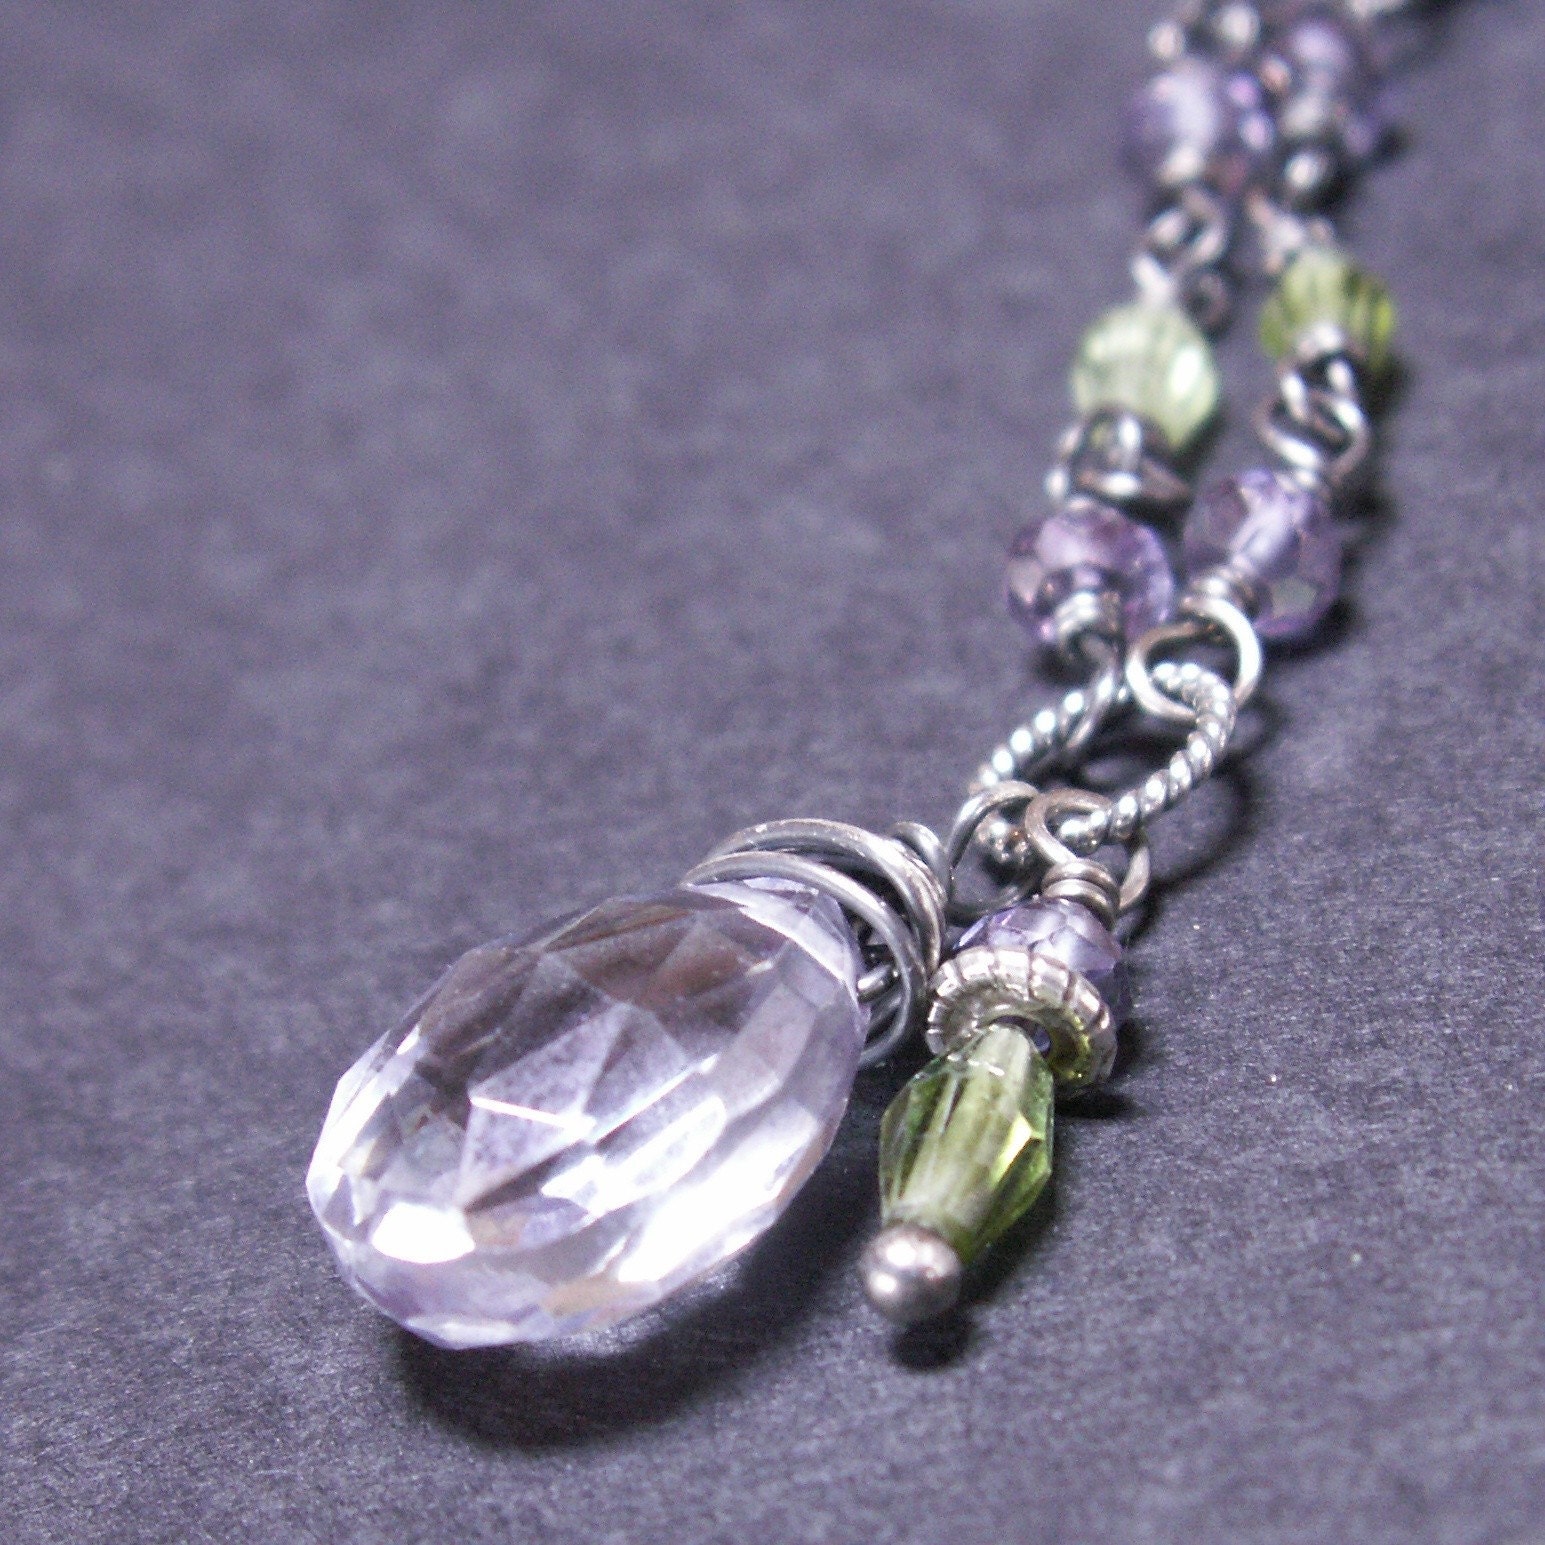 handcrafted jewelry necklace sterling silver oxidized gray blue quartz green tourmaline